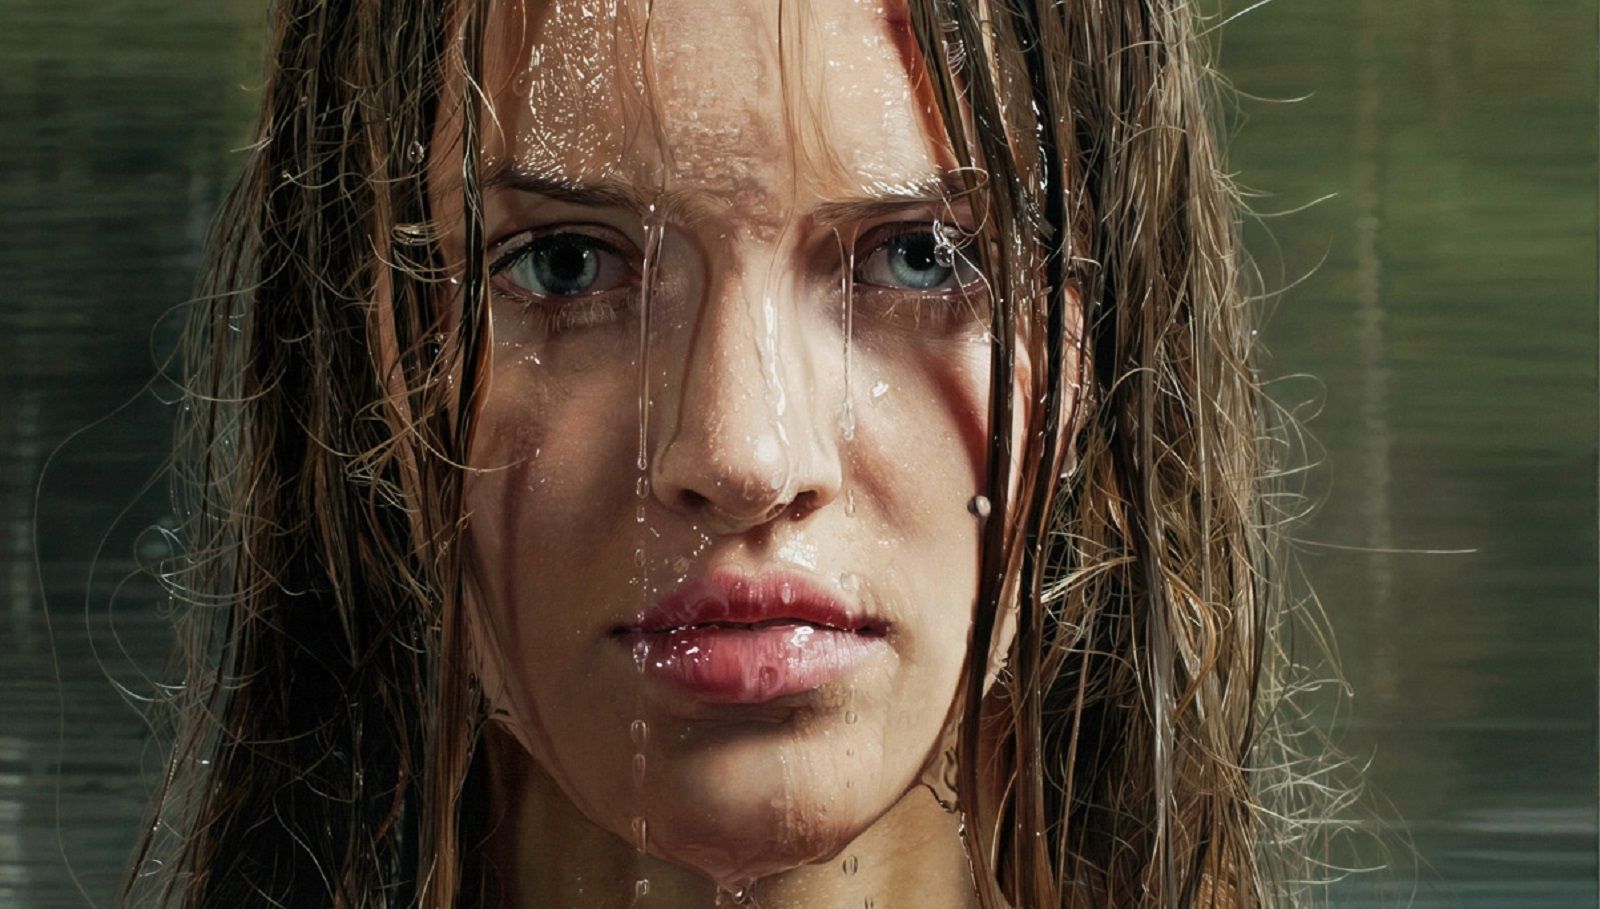 Mind-blowing works of hyper-realistic art that you won't believe aren't photos image 1